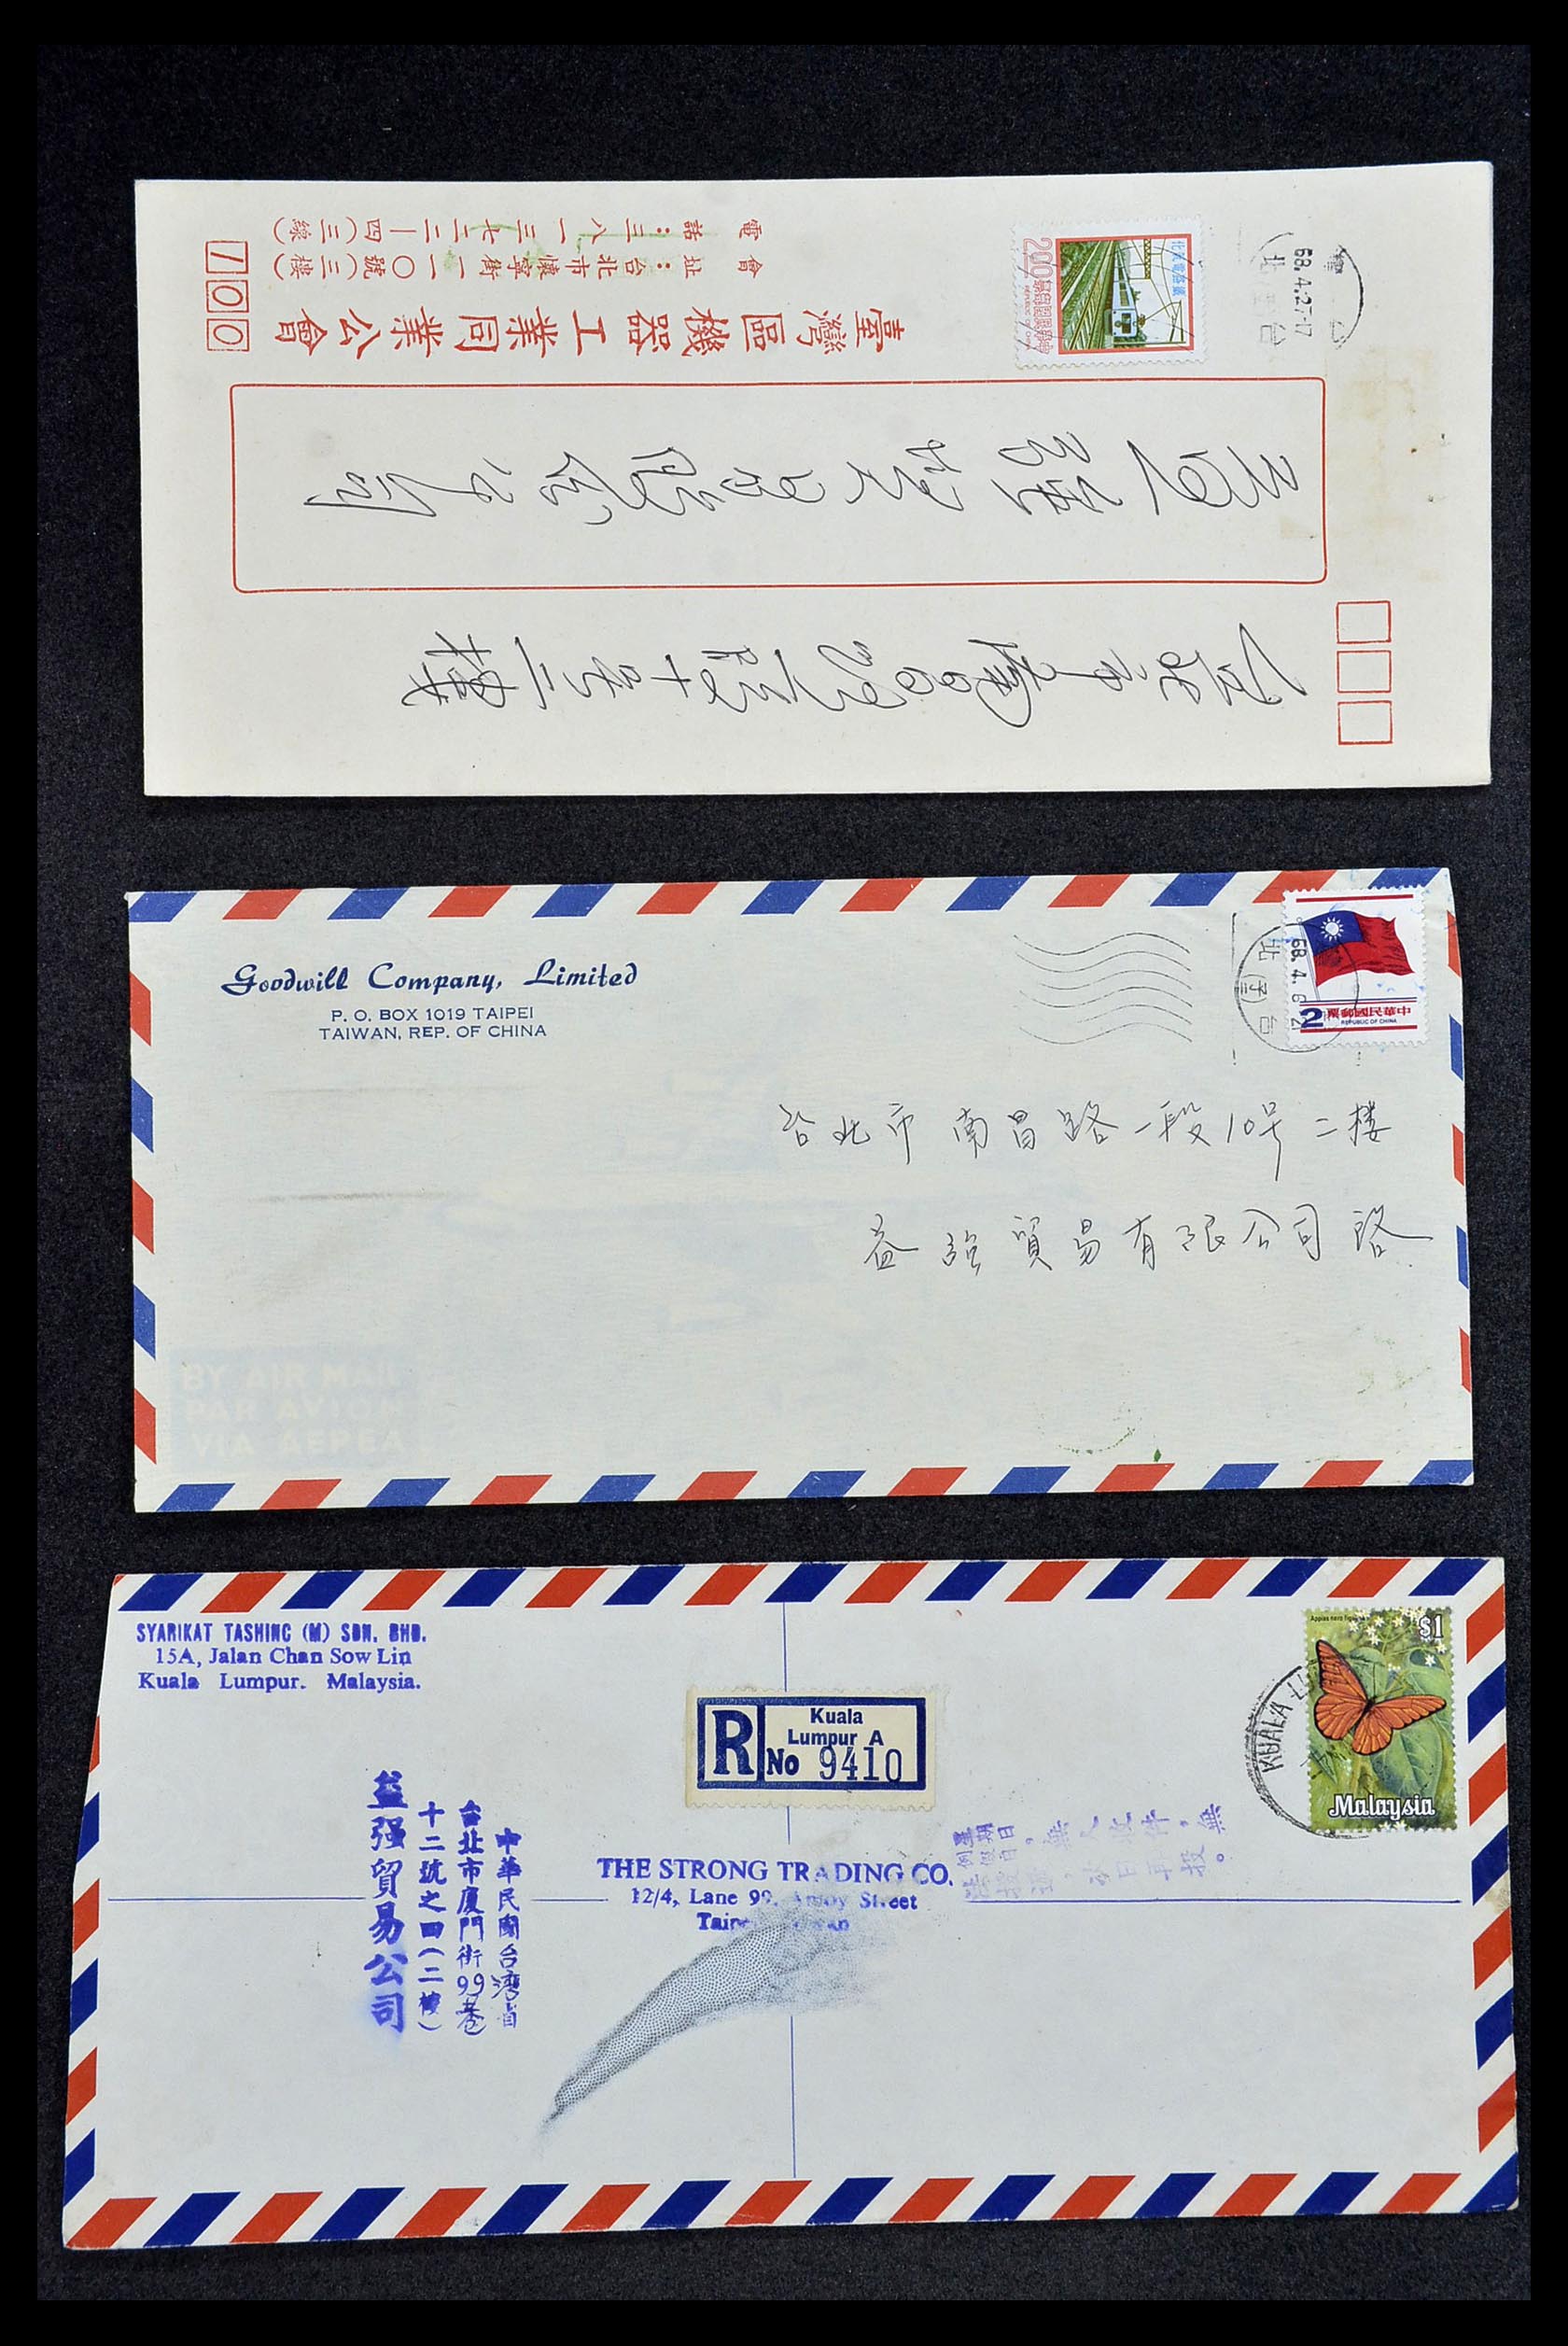 34402 055 - Stamp collection 34402 Taiwan covers 1960-2000.